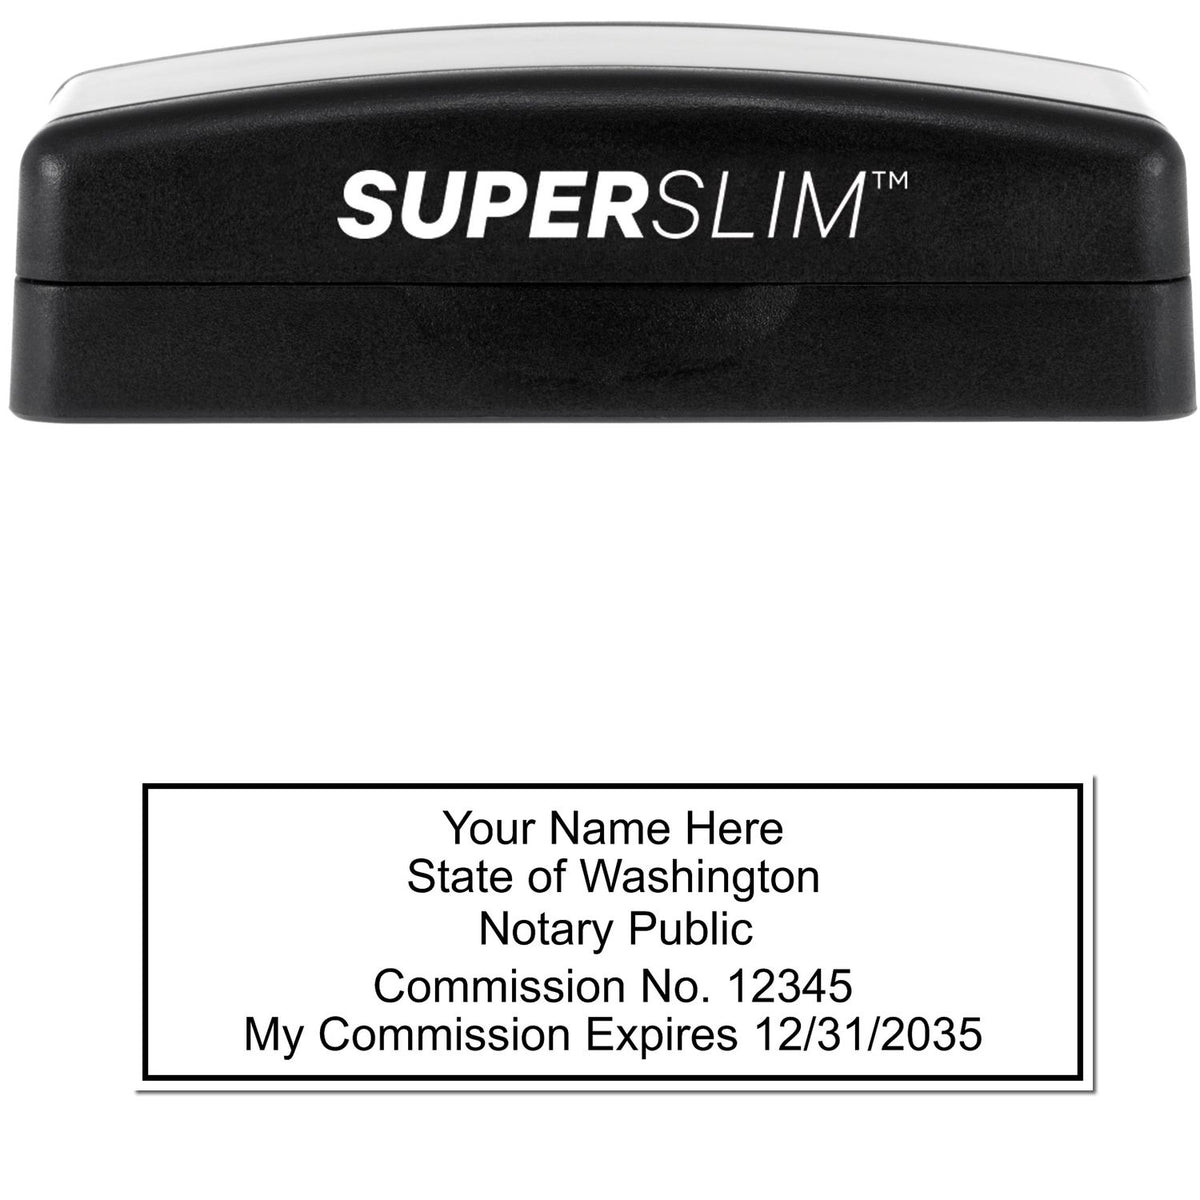 The main image for the Super Slim Washington Notary Public Stamp depicting a sample of the imprint and electronic files